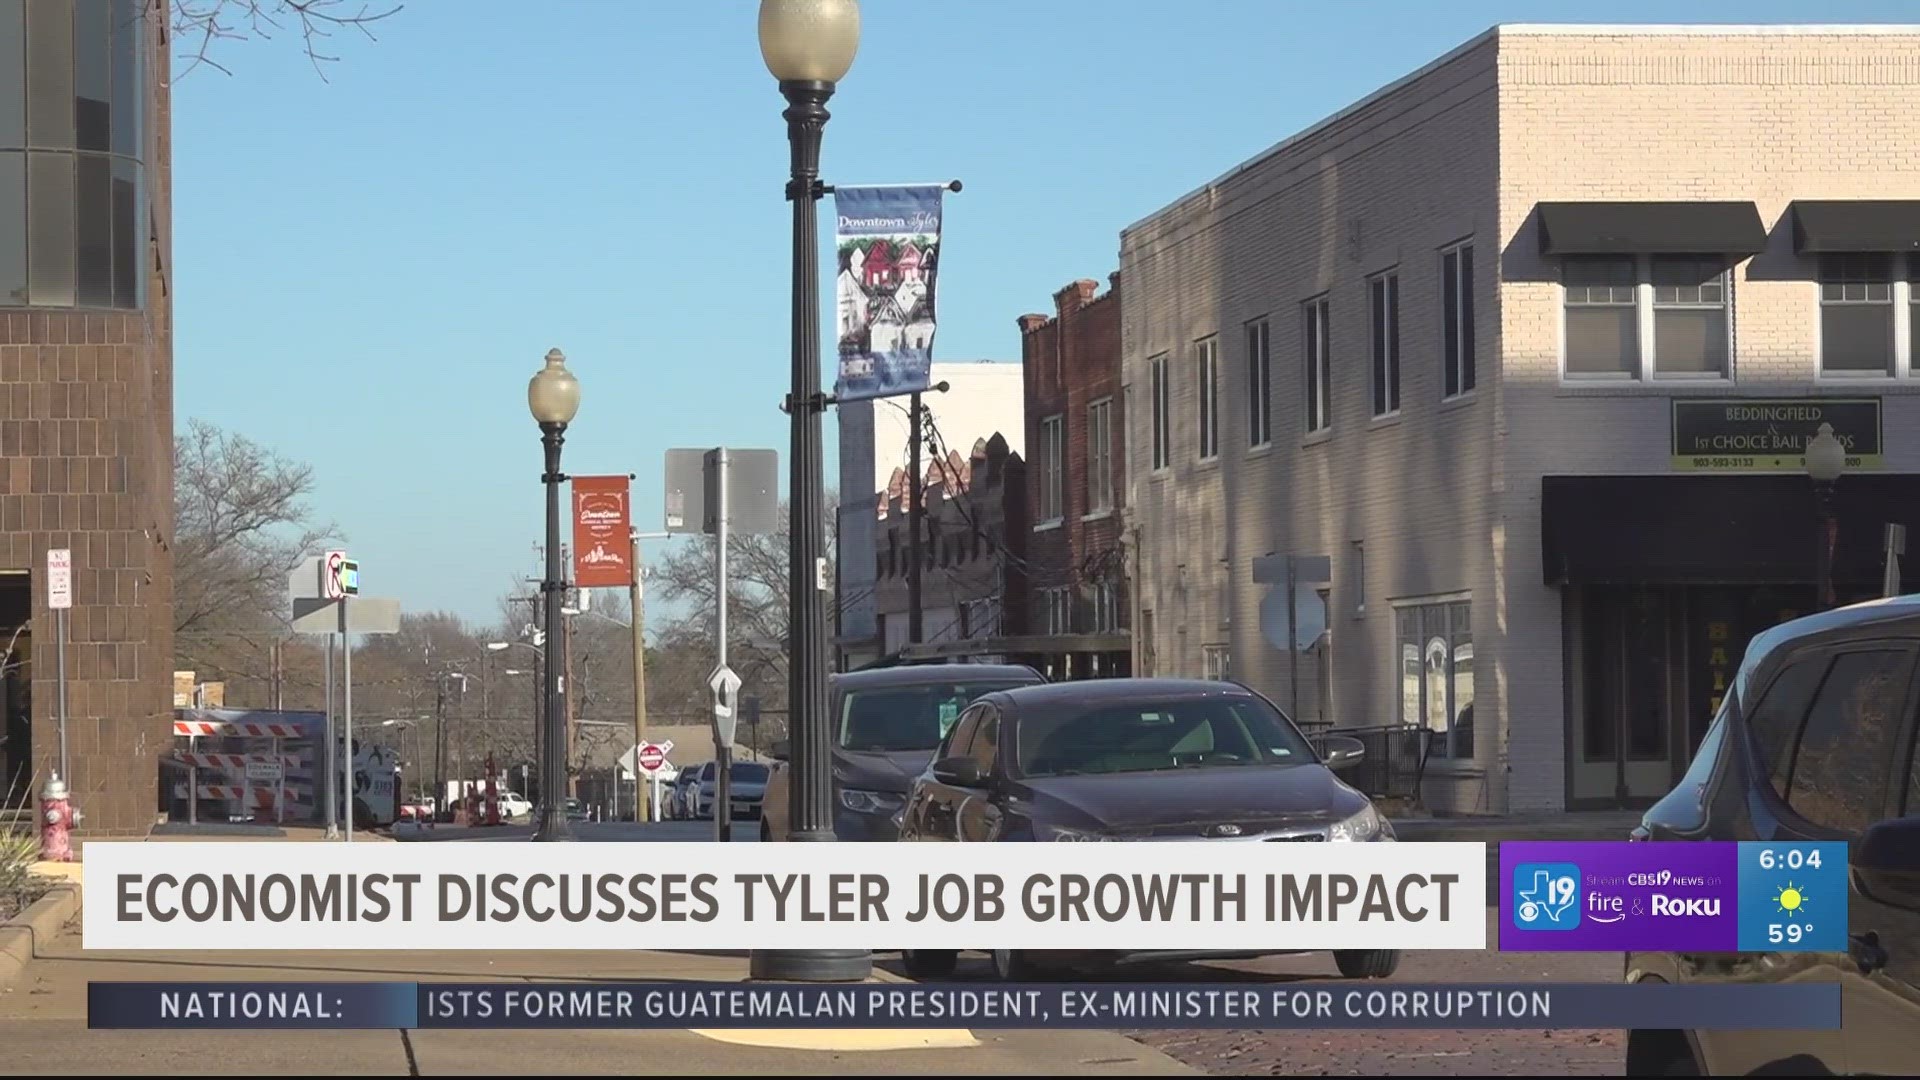 A renowned economist Dr. Ray Perryman said he expects consistent growth and expansion as more job opportunities surface in Tyler.